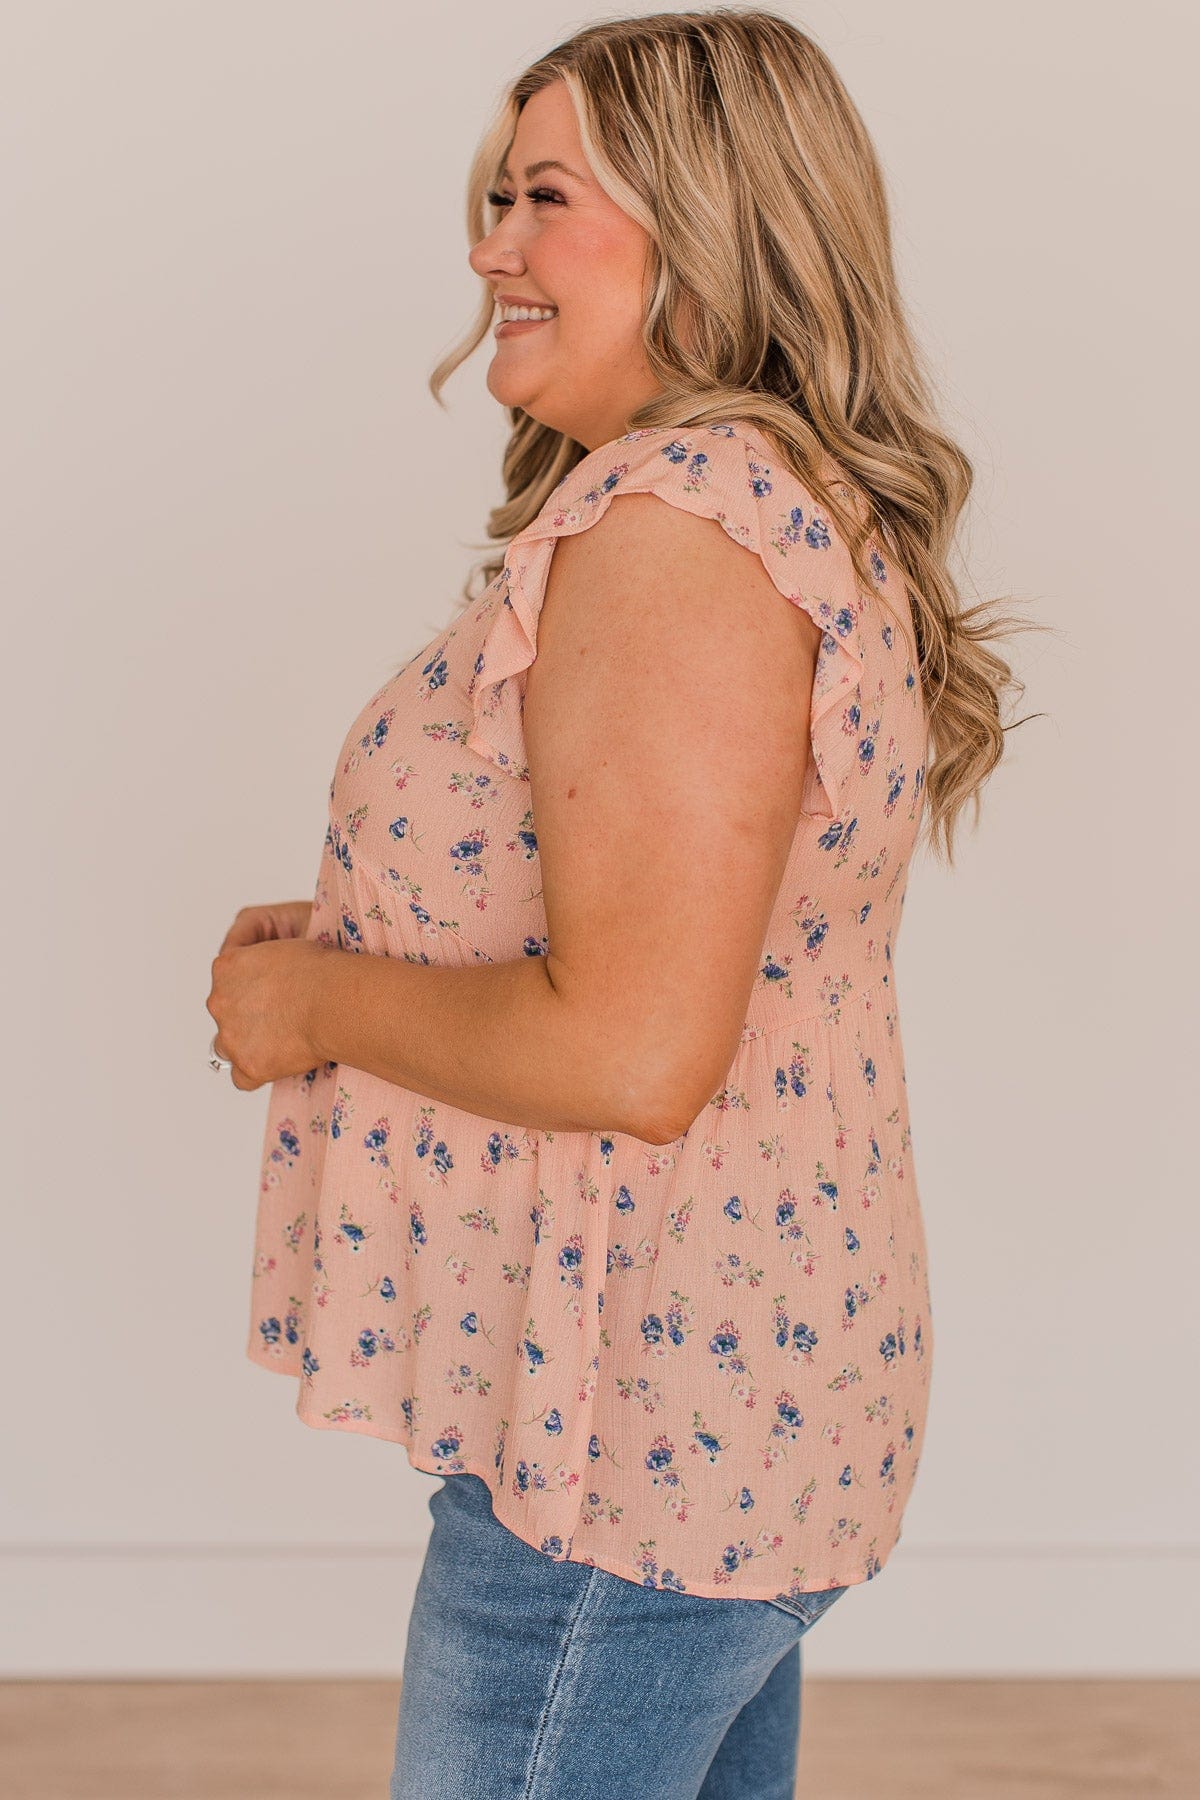 Deeply Adored Floral Babydoll Top- Light Pink